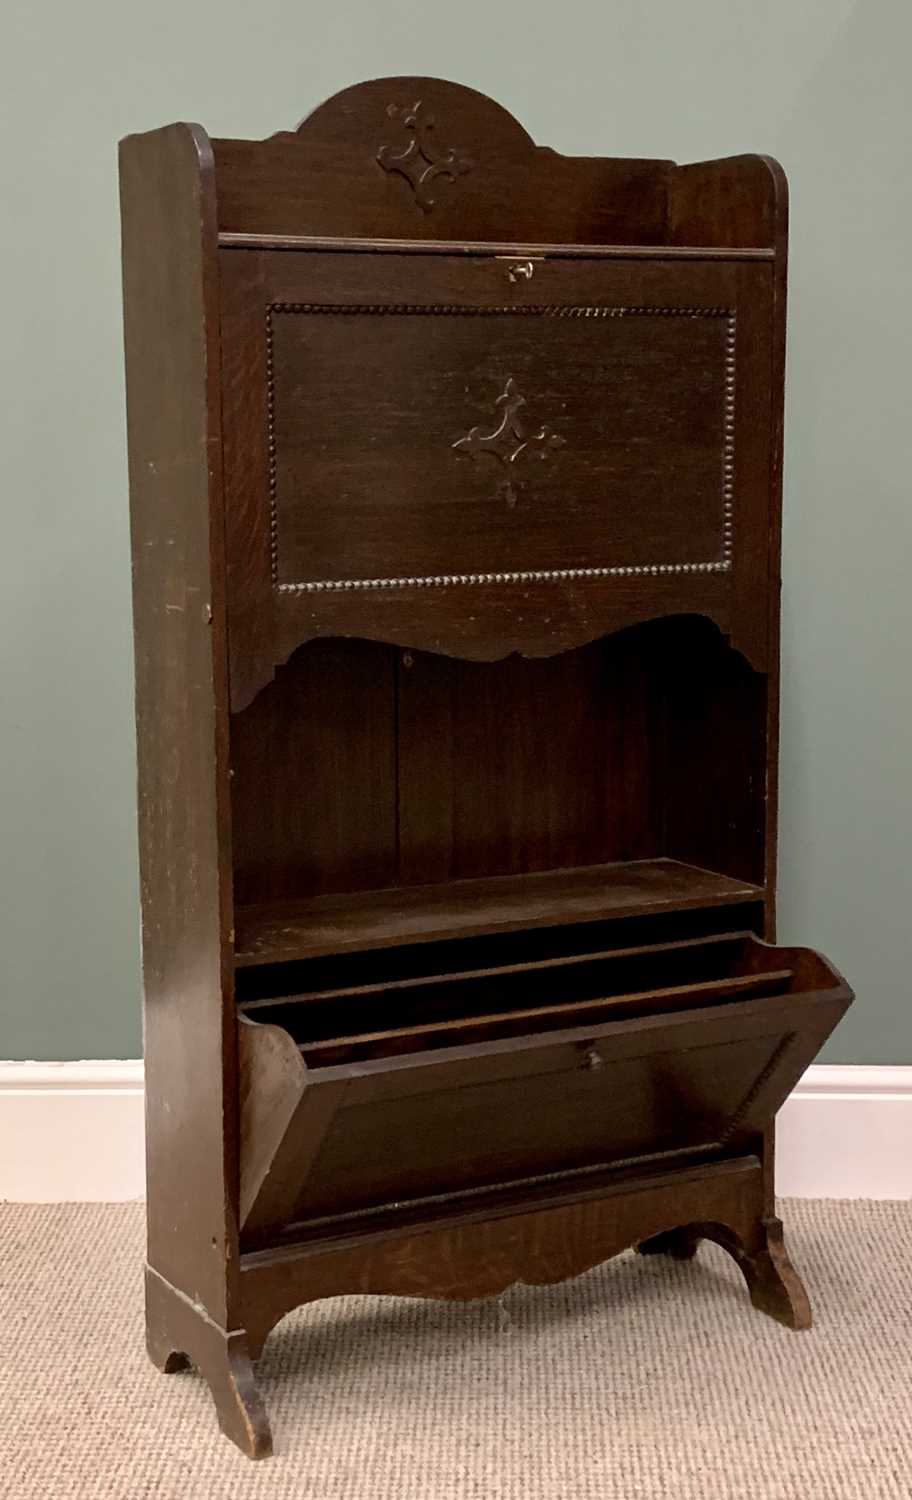 VINTAGE OAK COMPACT BUREAU BOOKCASE - with drop down upper and lower section and central shelves, - Image 3 of 3